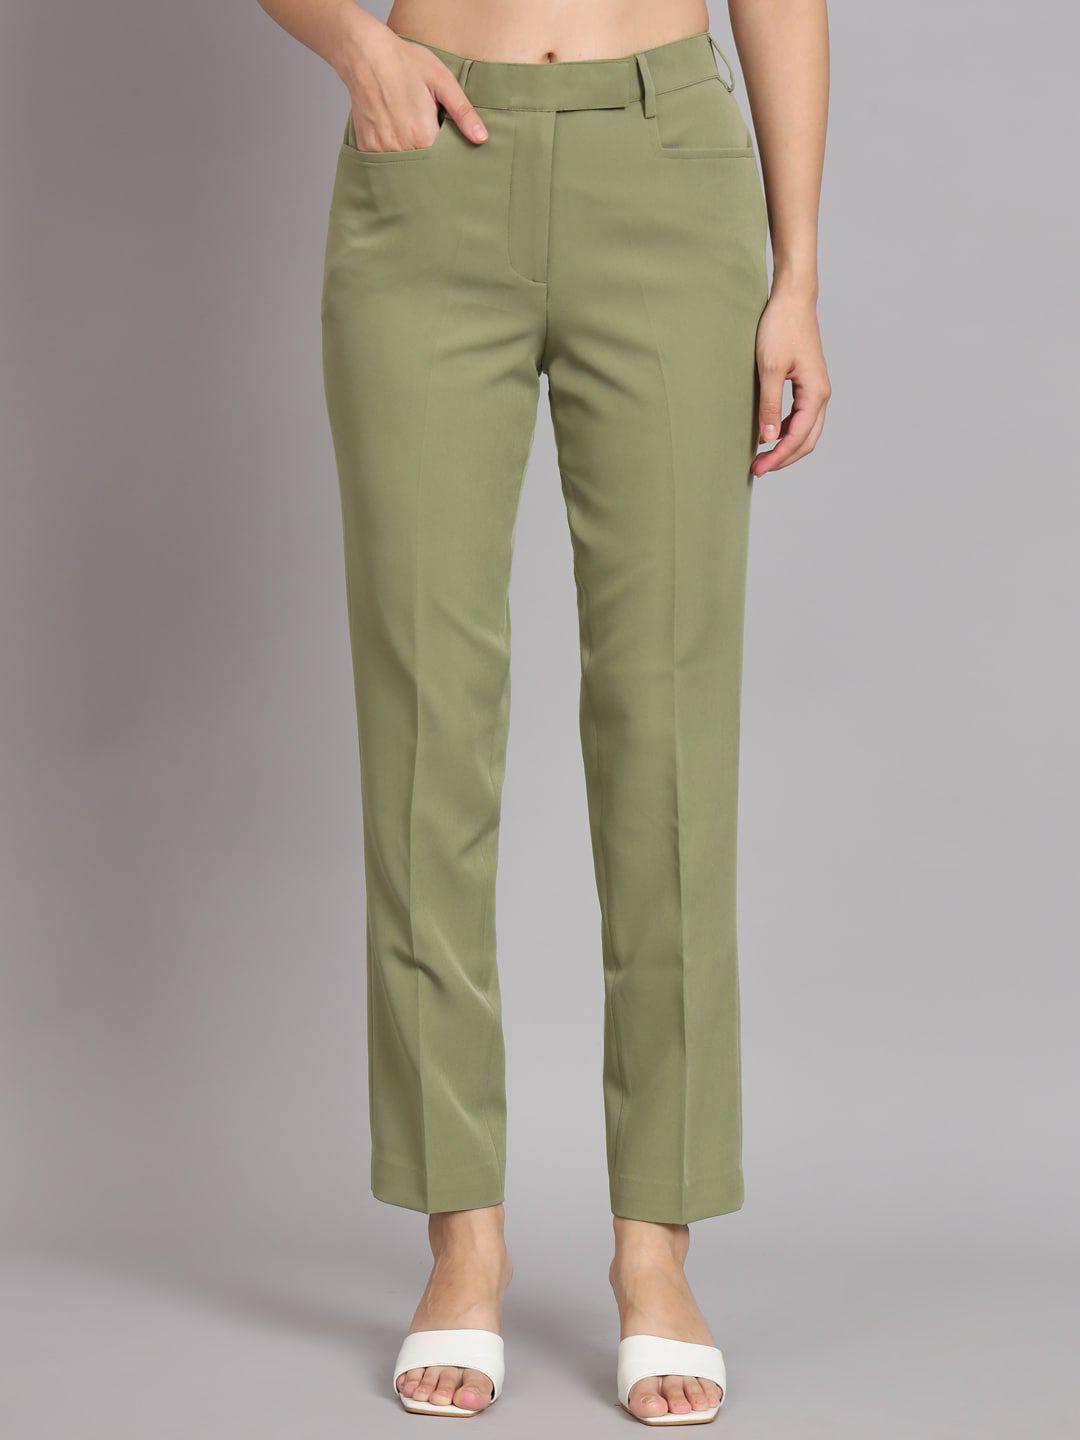 powersutra women olive green original easy wash trousers